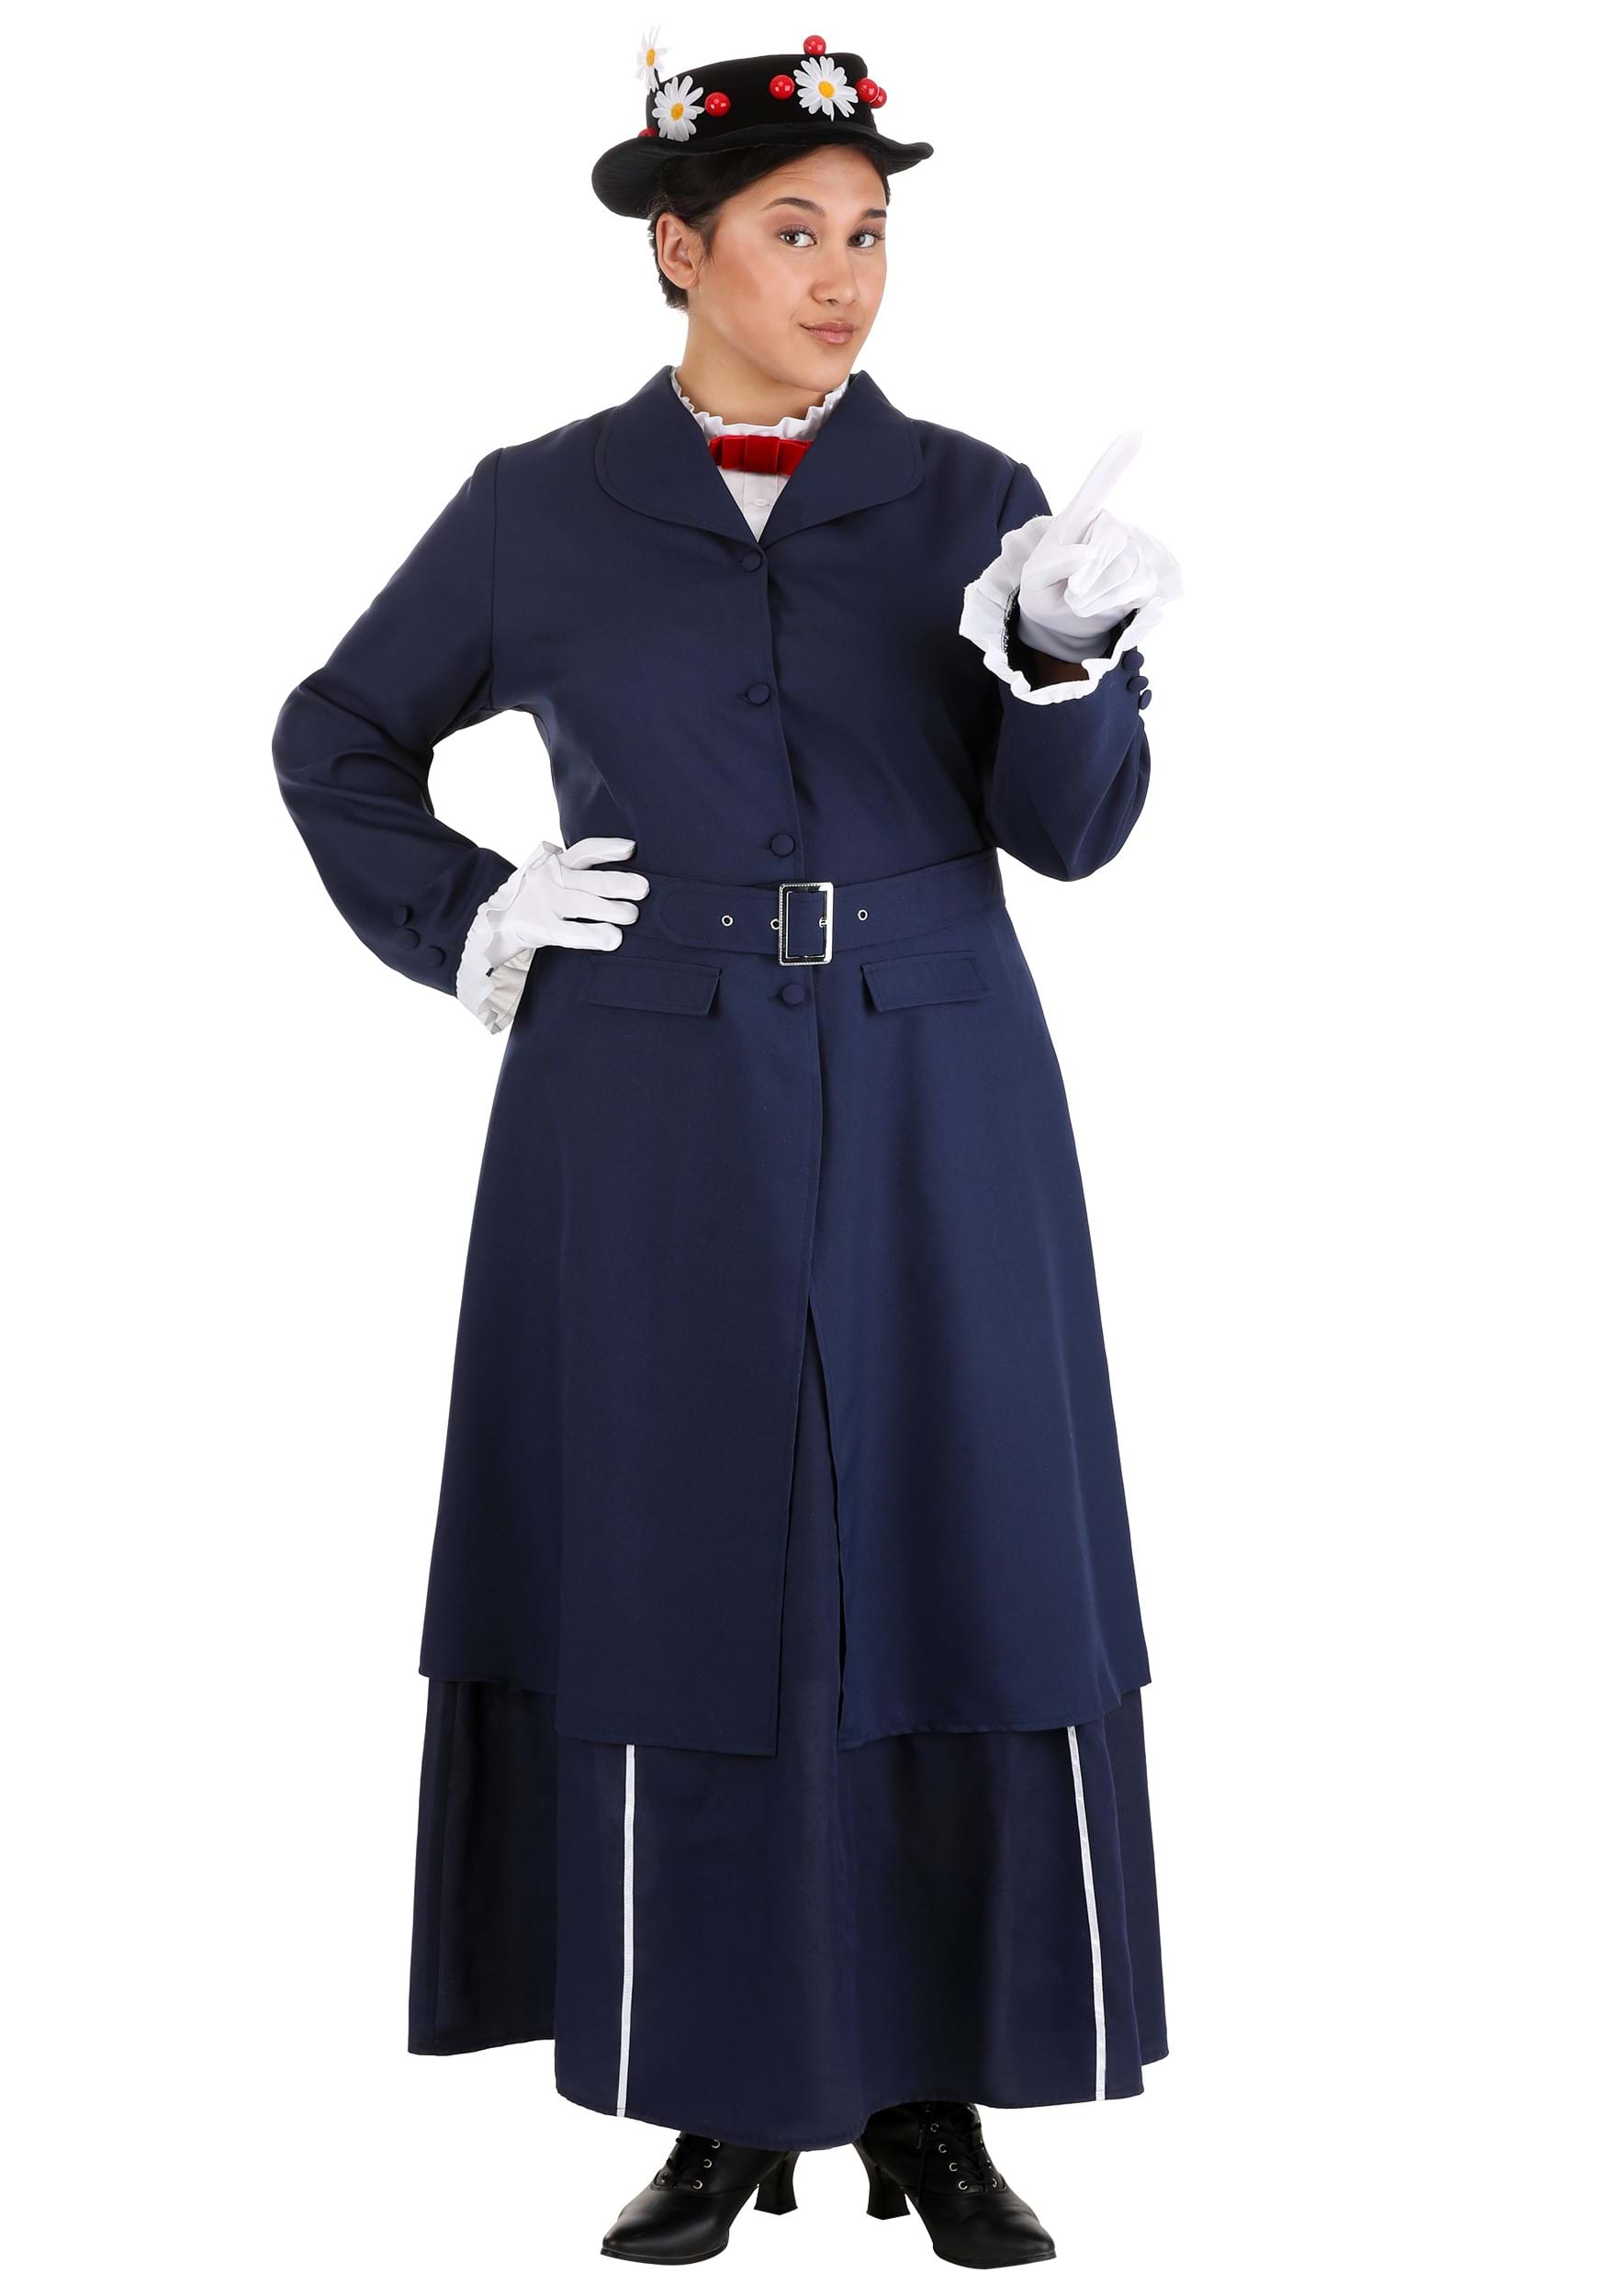 Plus Size Mary Poppins Costume for Women